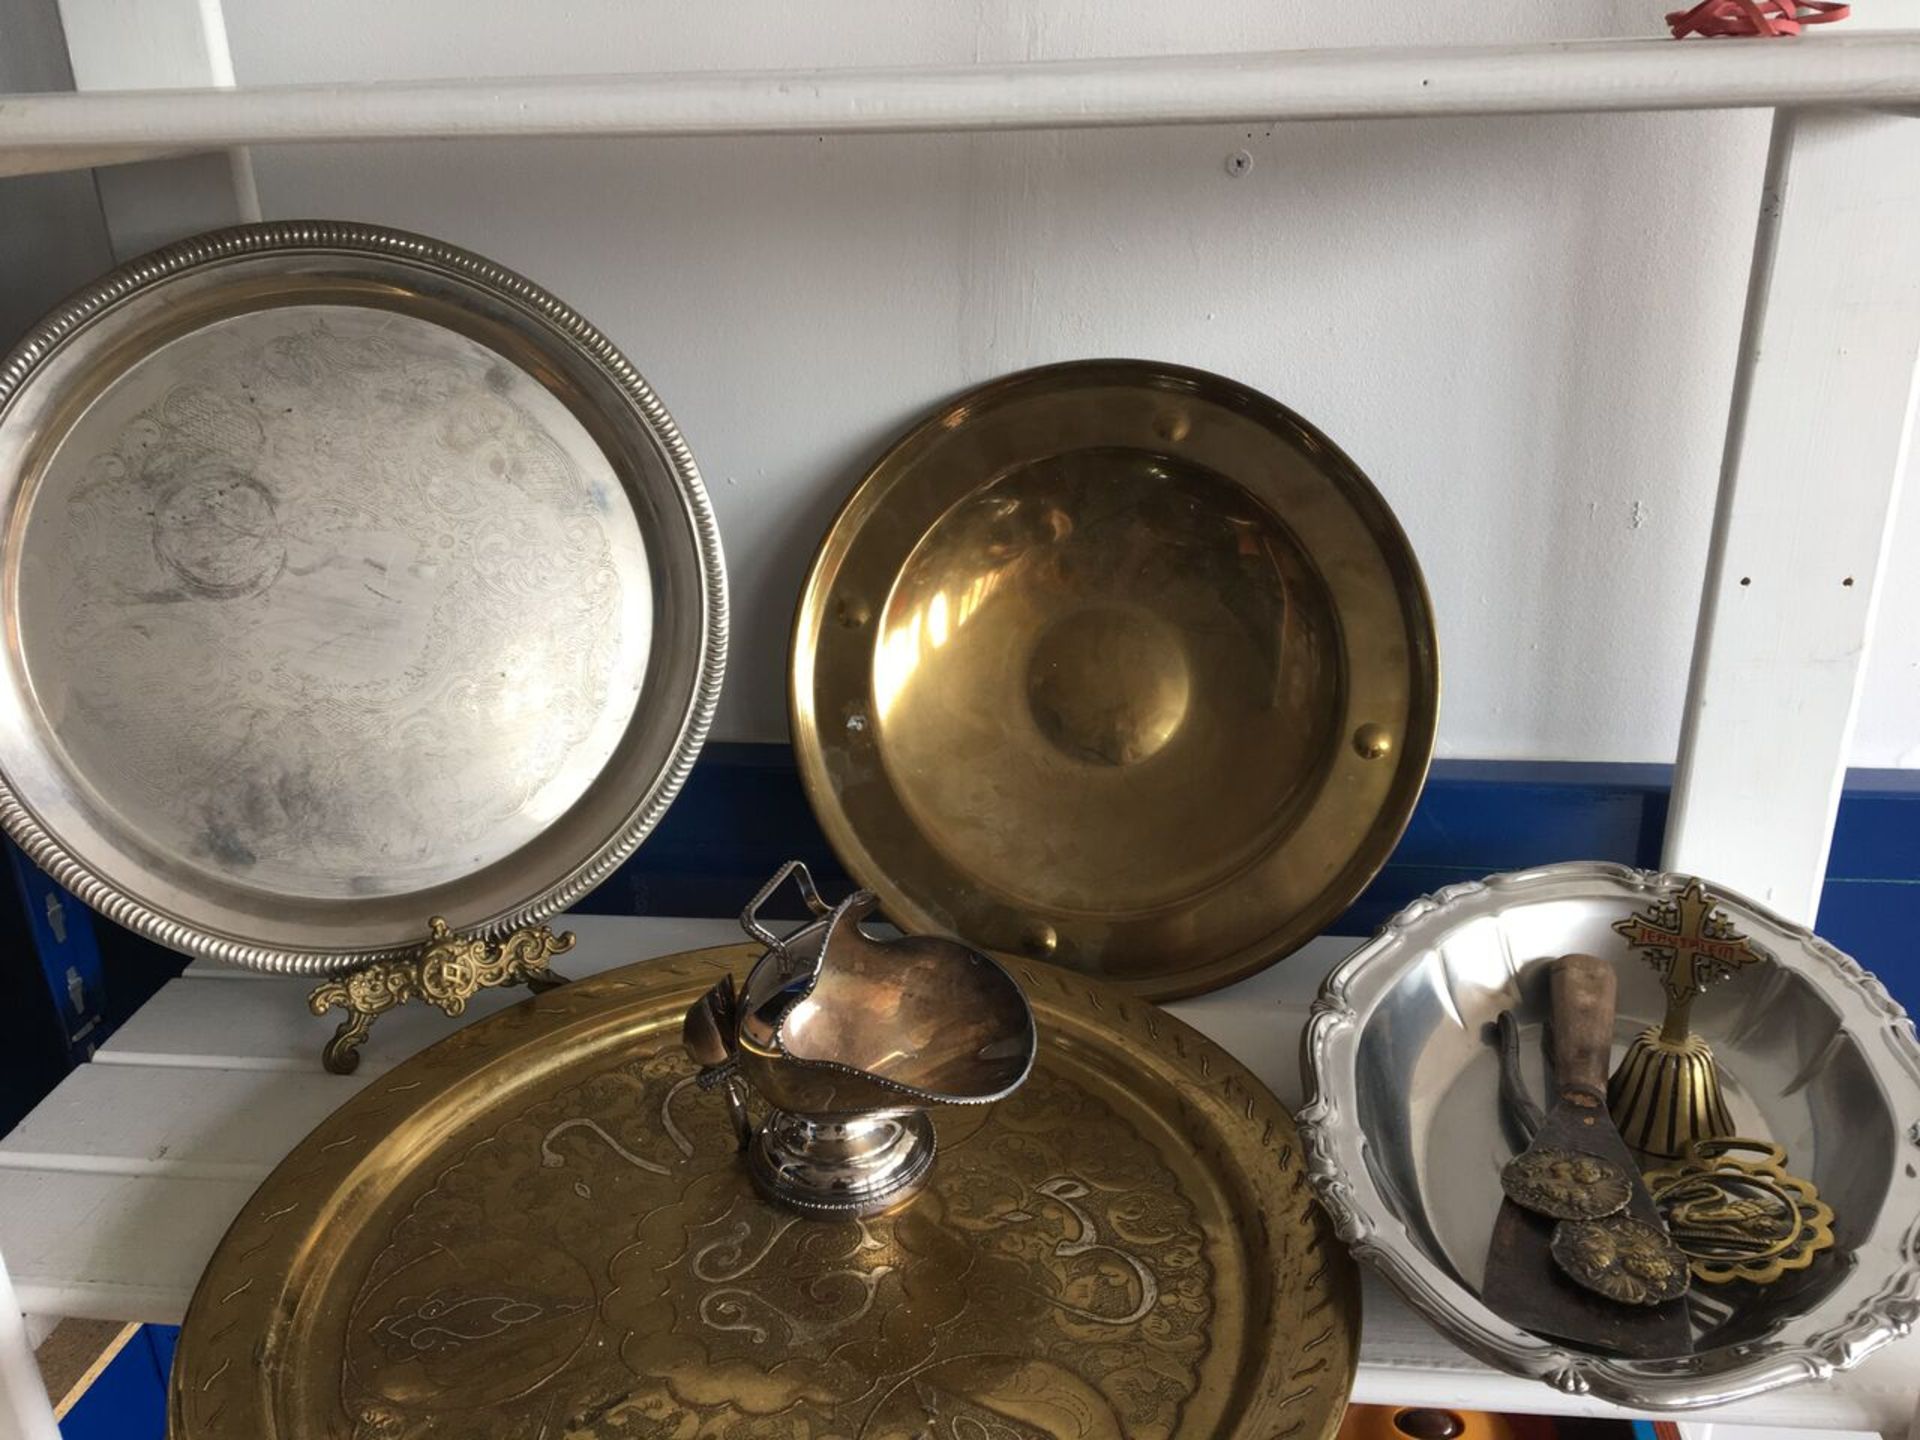 GROUP OF VINTAGE METALWARE - 11 ITEMS IN TOTAL. FREE UK DELIVERY. NO VAT.